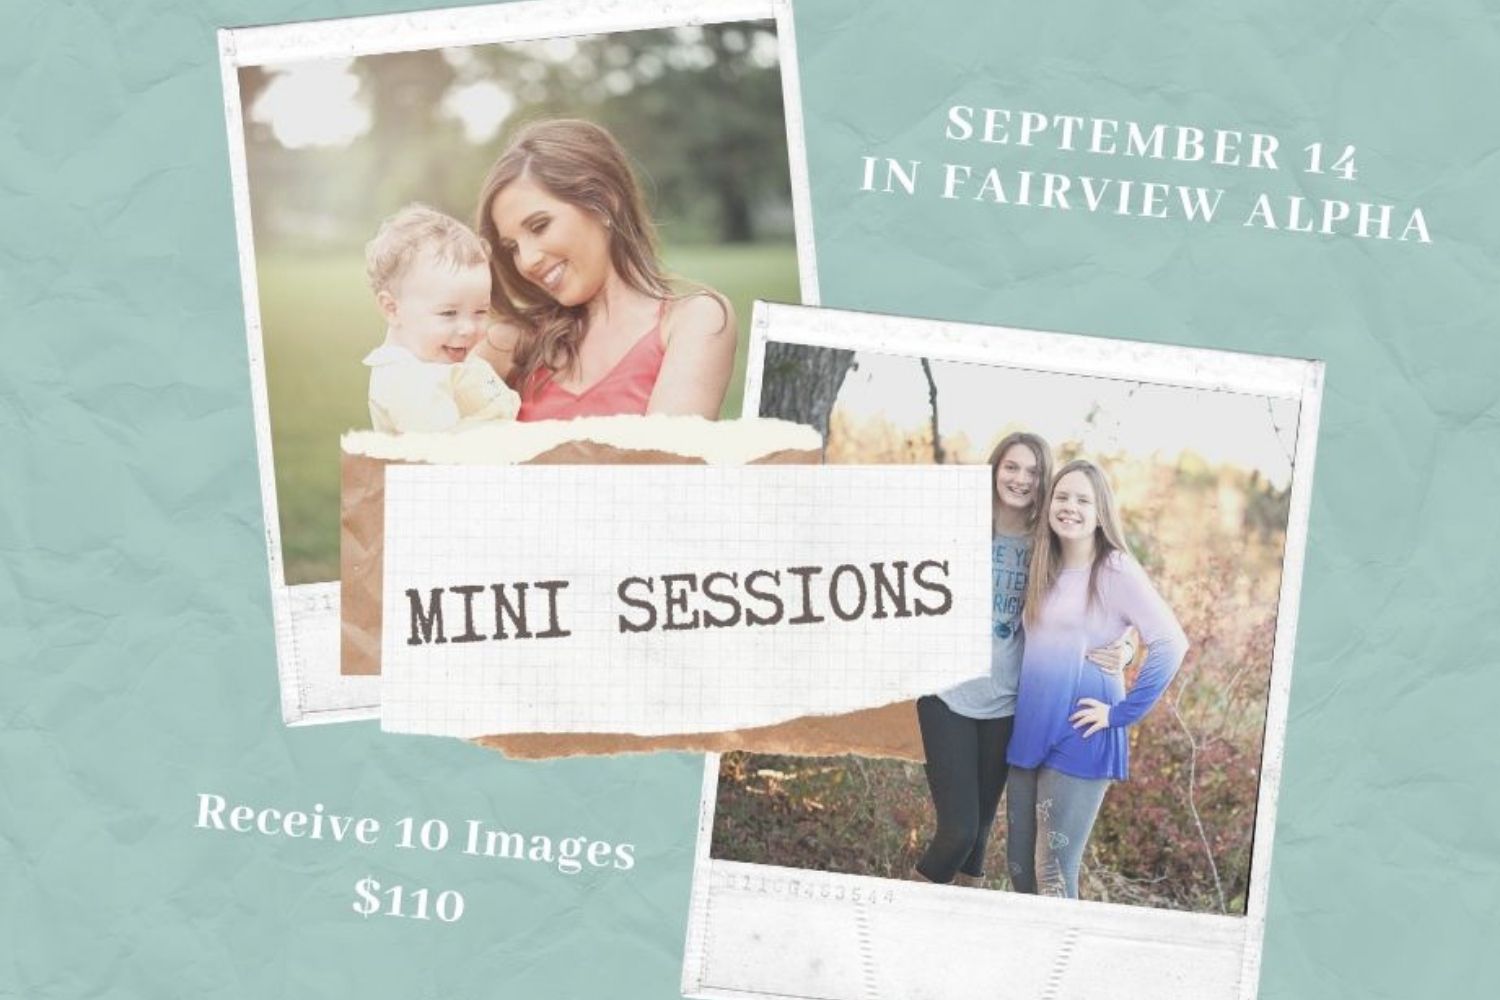 Natchitoches Louisiana Photographer Wendy Robinette is offering an end of summer mini session event on September 14, 2019.